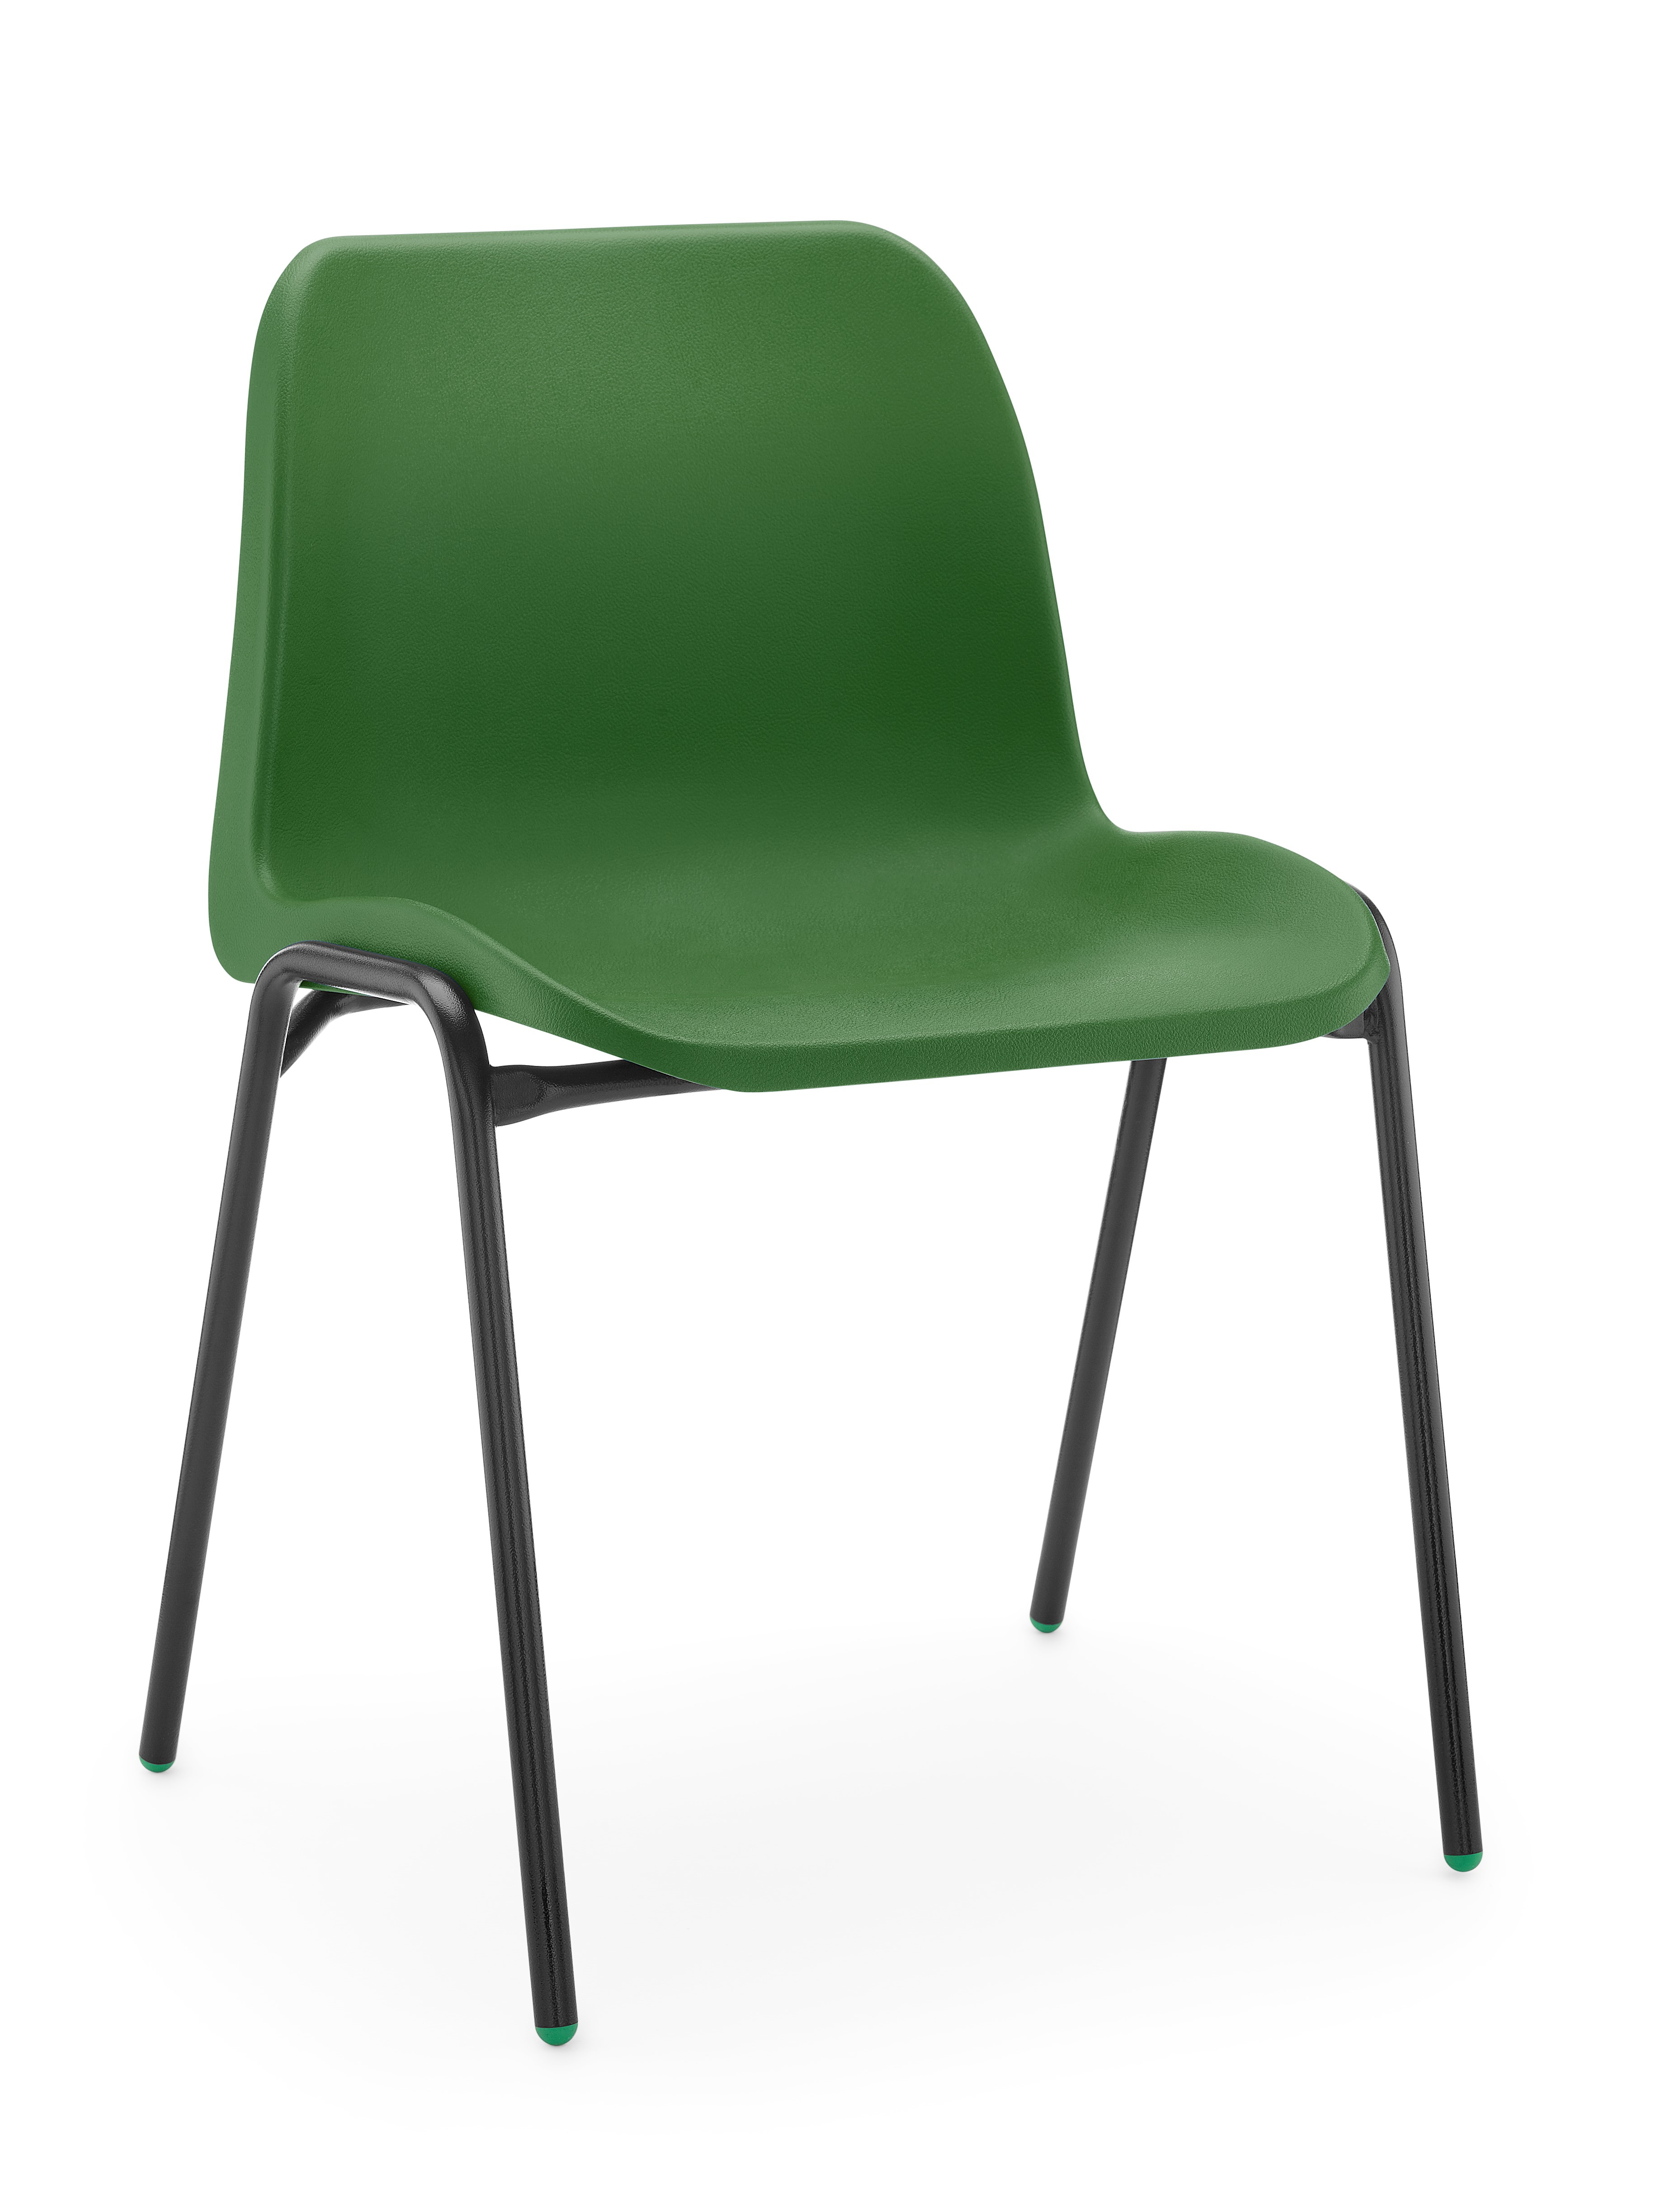 Classmates Chairs Green - 11-14 years